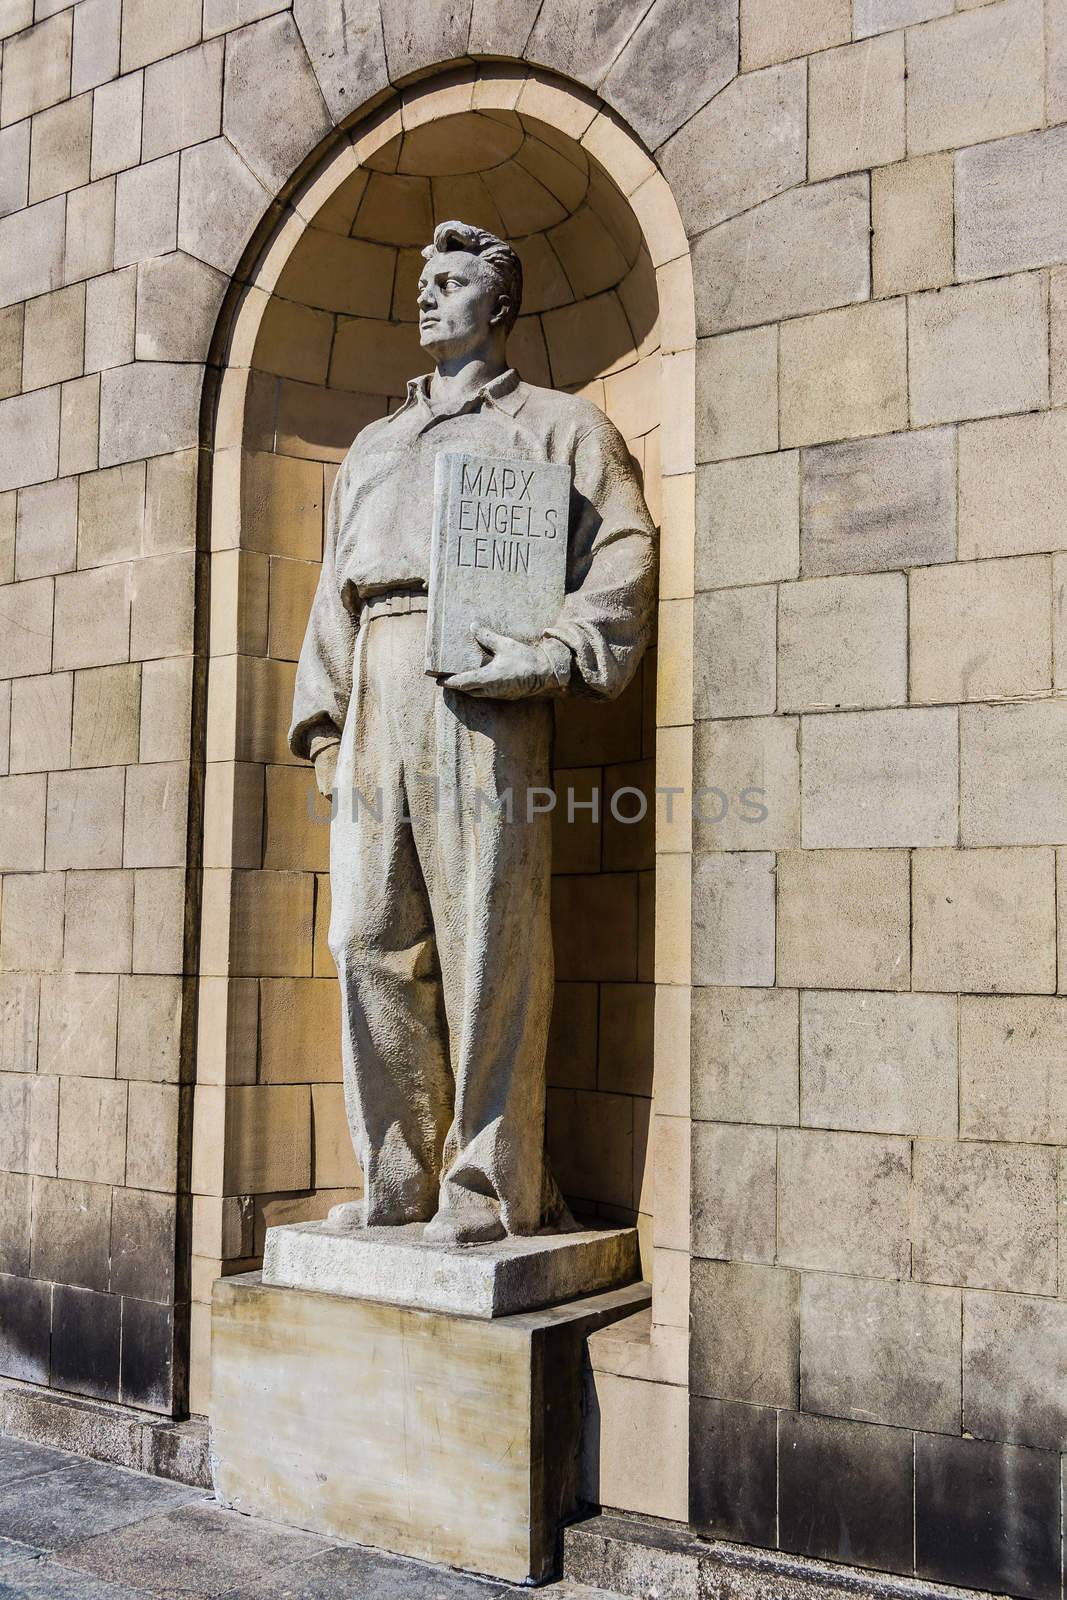 Socialist realism statue on the facade of the Palace of Culture and Science in Warsaw, built as a gift for Poland from USSR in the middle of fifties of 20th century.